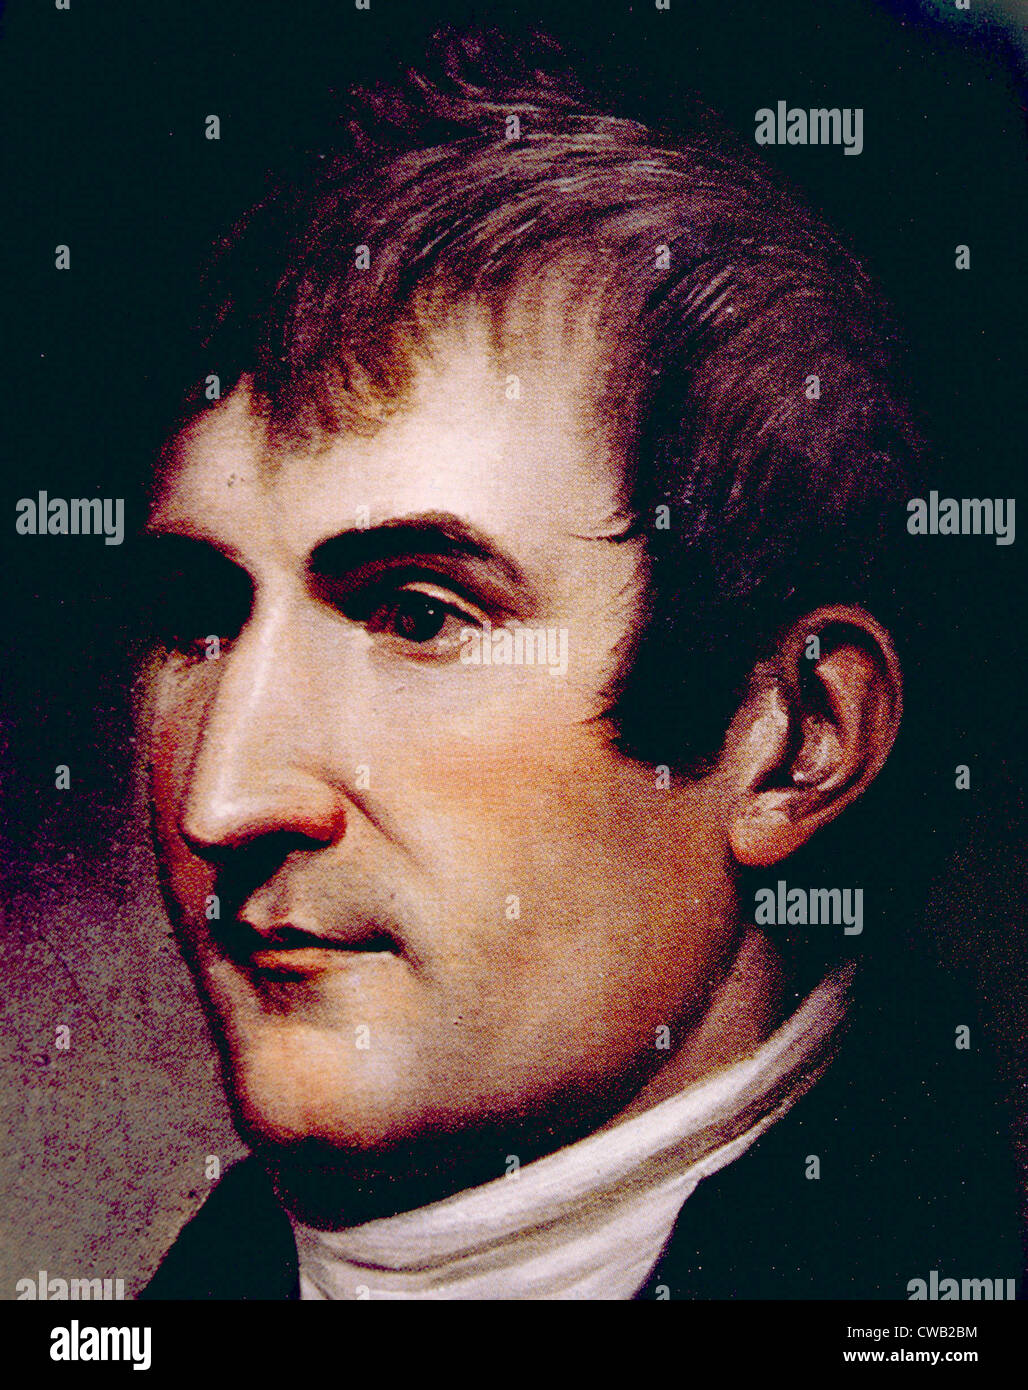 Meriwether Lewis (1774-1809), co-leader del Lewis & Clark Expedition, partrait da Charles Willson Peale Foto Stock